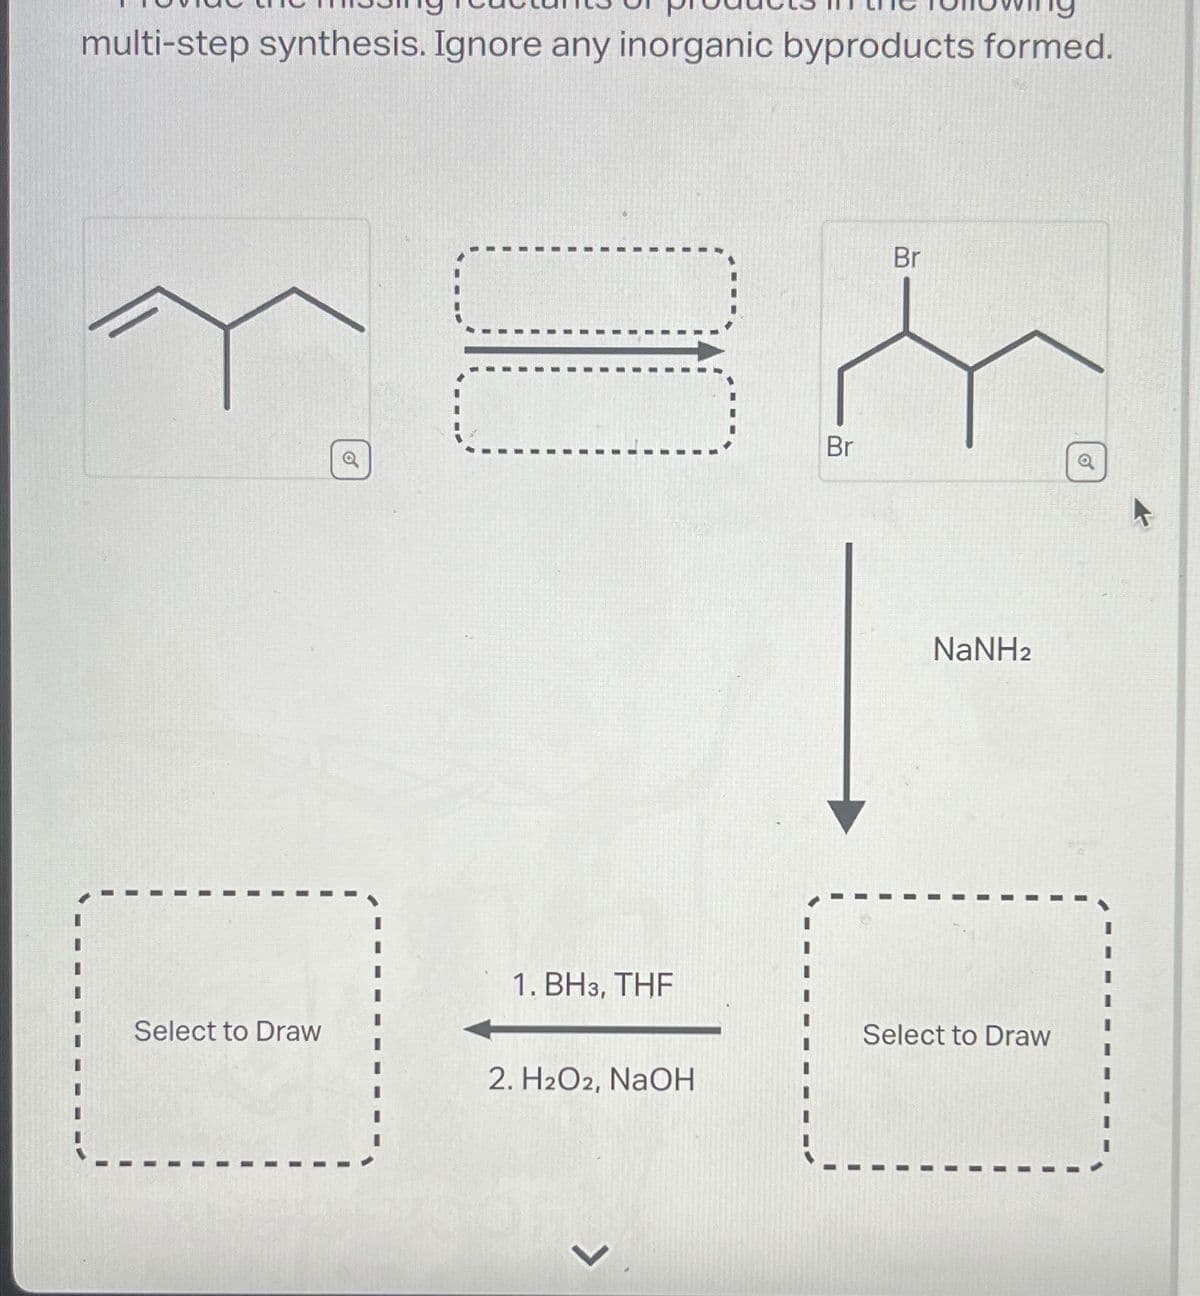 multi-step synthesis. Ignore any inorganic byproducts formed.
Br
Q
Br
NaNH2
0
1. BH3, THF
Select to Draw
Select to Draw
2. H2O2, NaOH